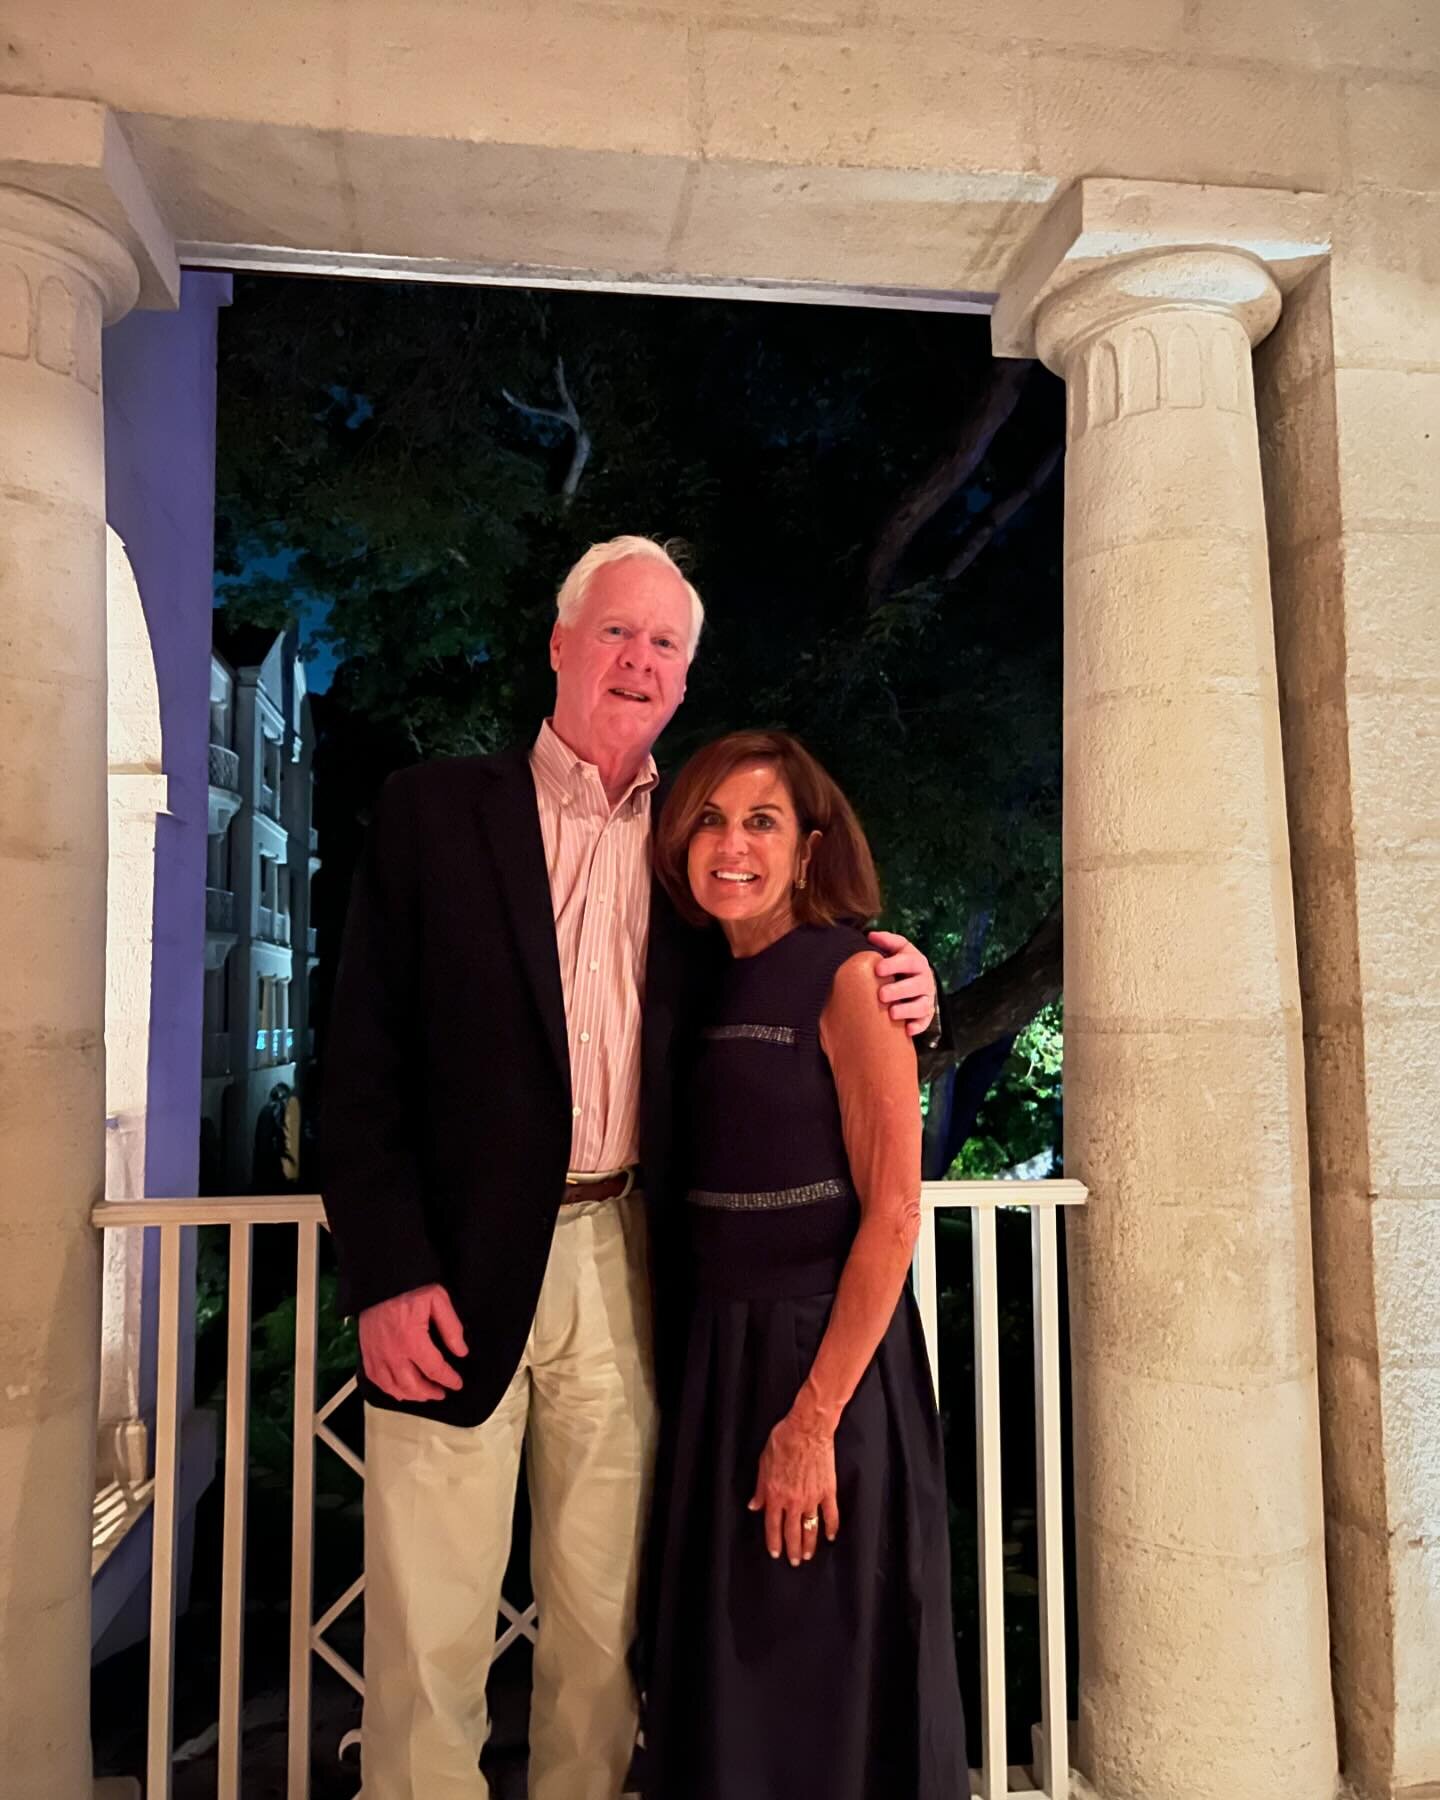 Dinner date at the beautiful L&rsquo;Acajou restaurant at Sandy Lane Resort on Barbados.  We have spent a wonderful week here in the sun at Sandy Lane.  #sandylanebarbados